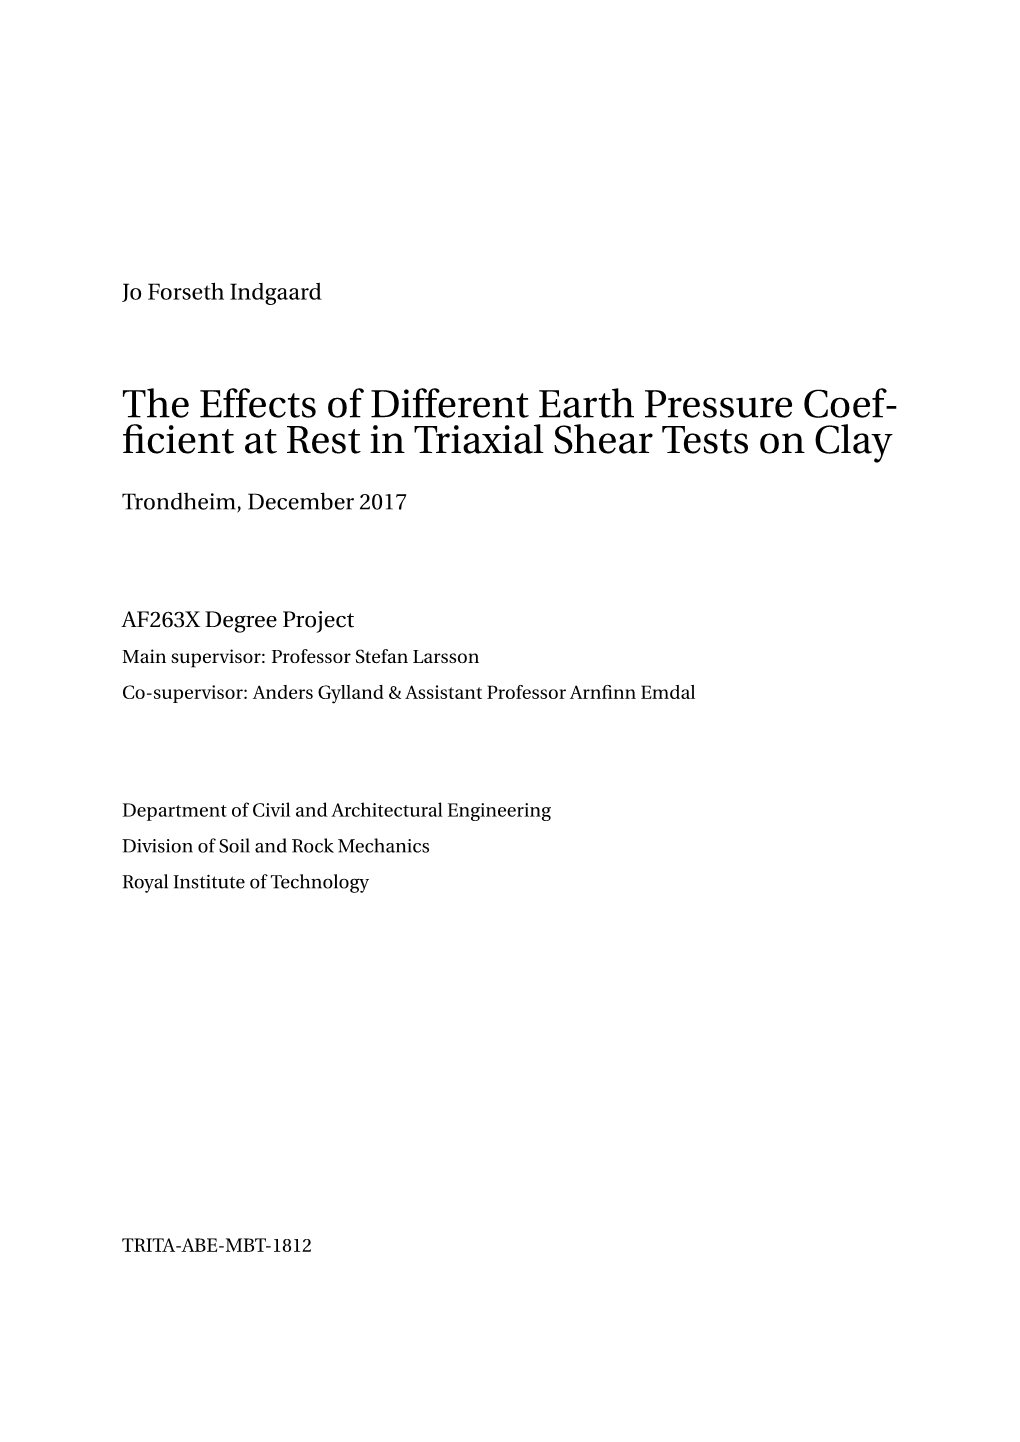 The Effects of Different Earth Pressure Coef- Ficient at Rest in Triaxial Shear Tests on Clay